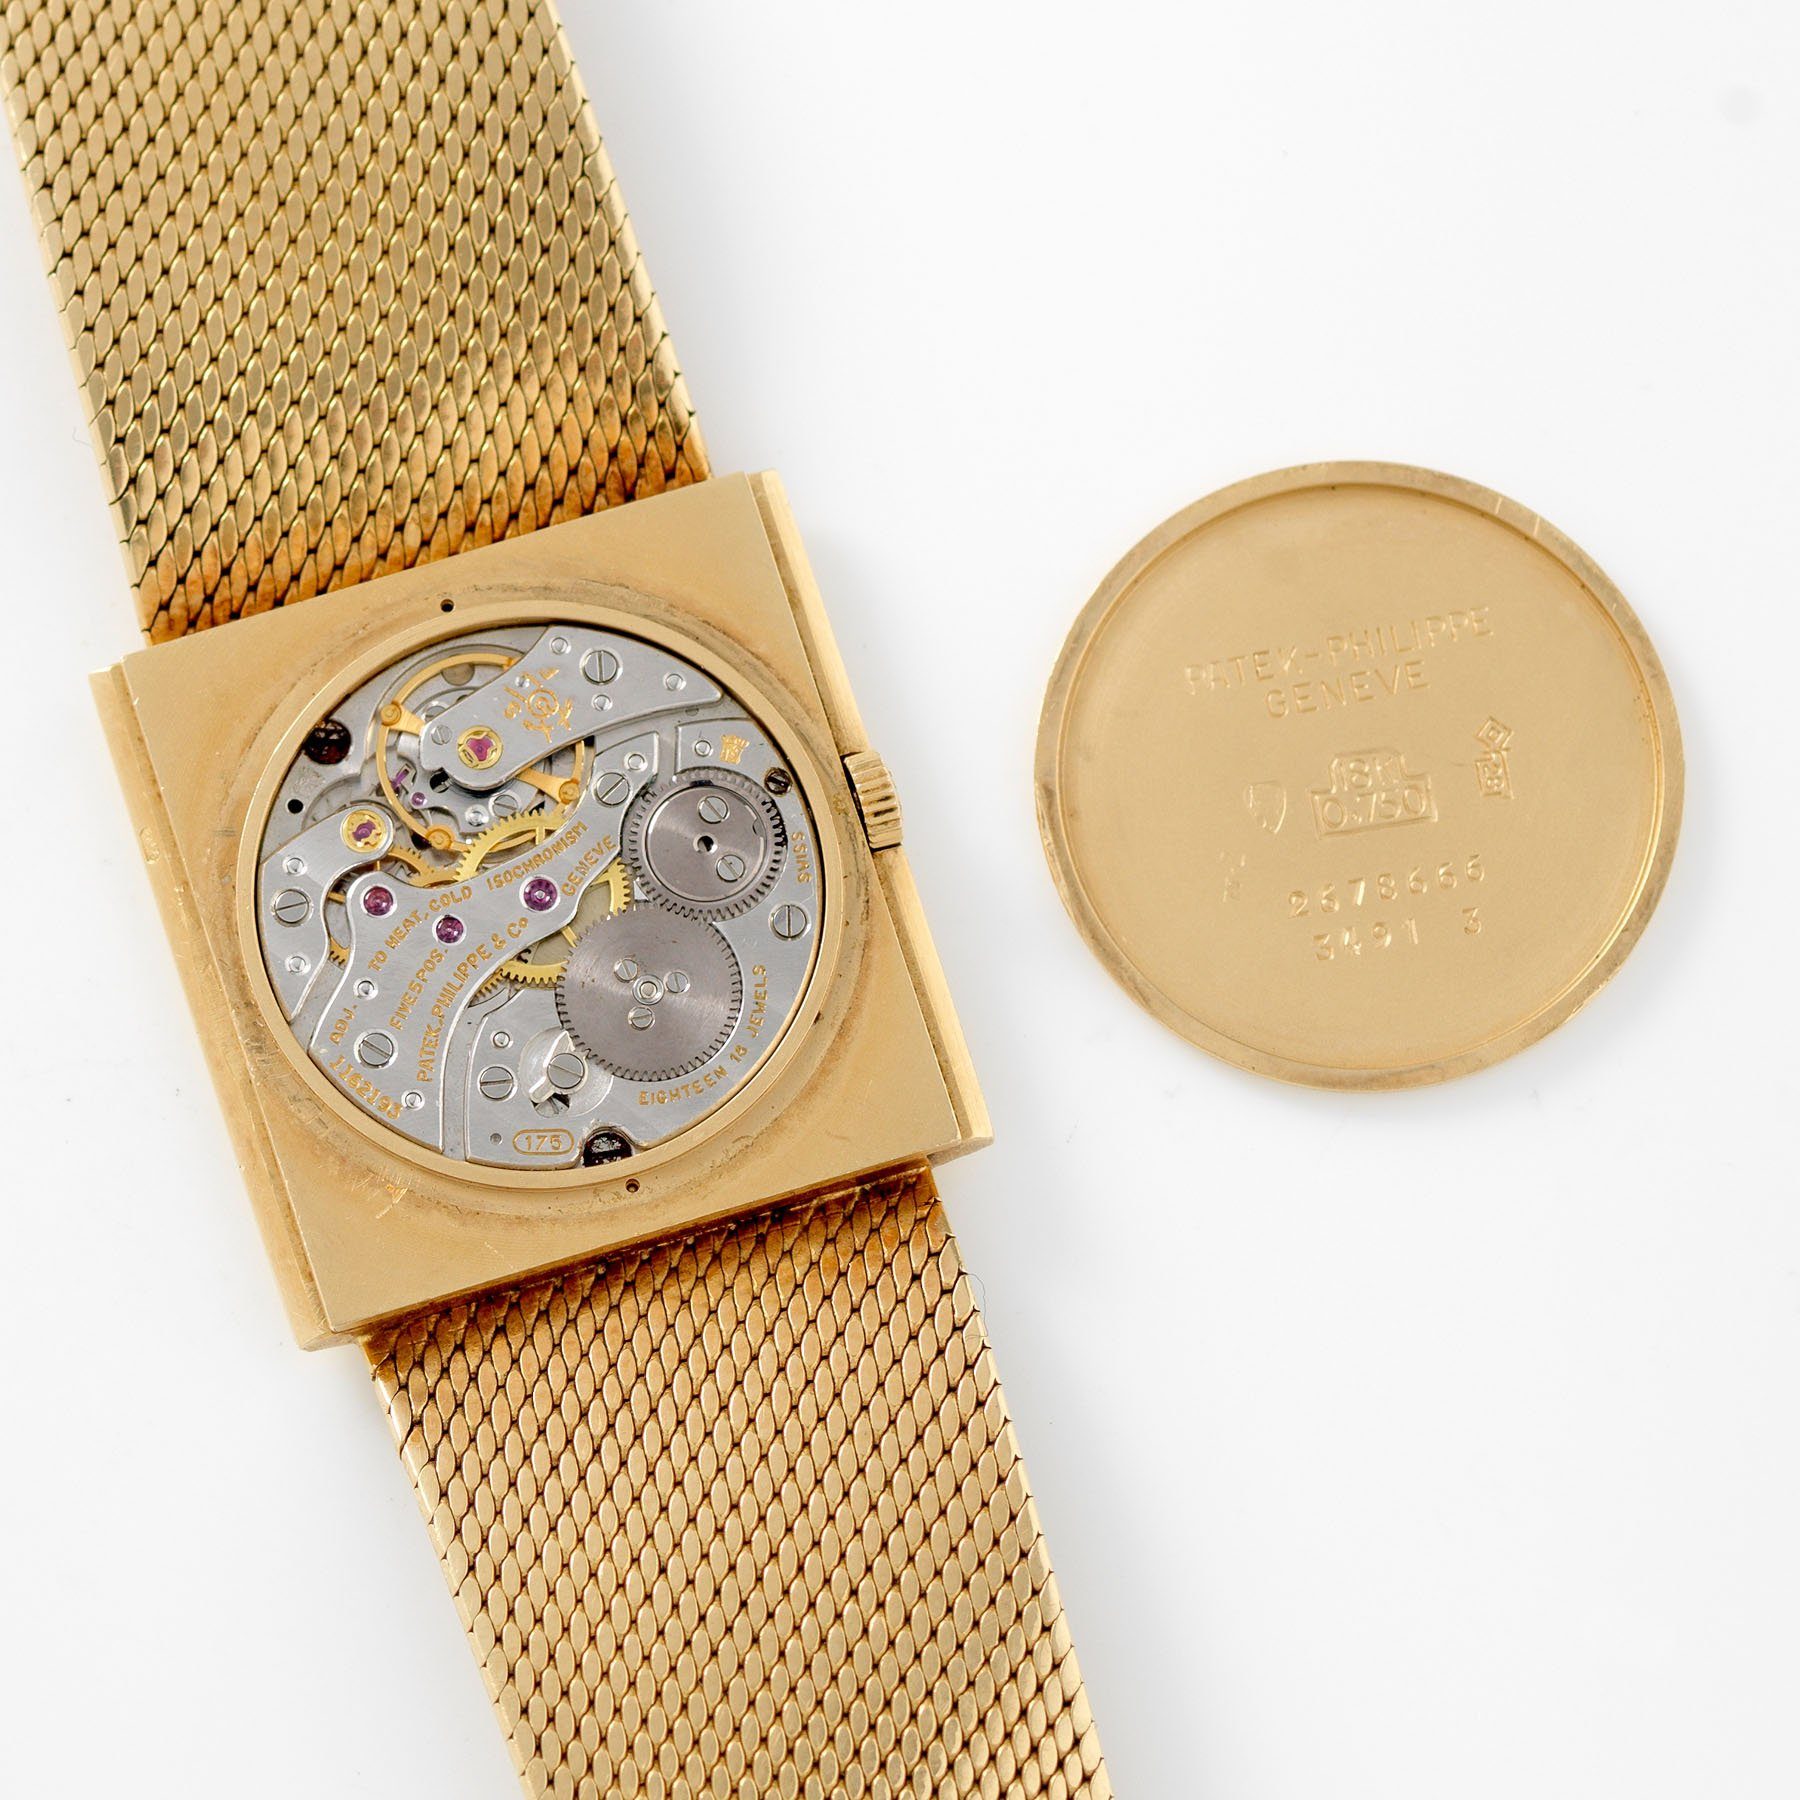 Patek Philippe Yellow Gold Dress Watch Reference 3491 with  a manual wind movement